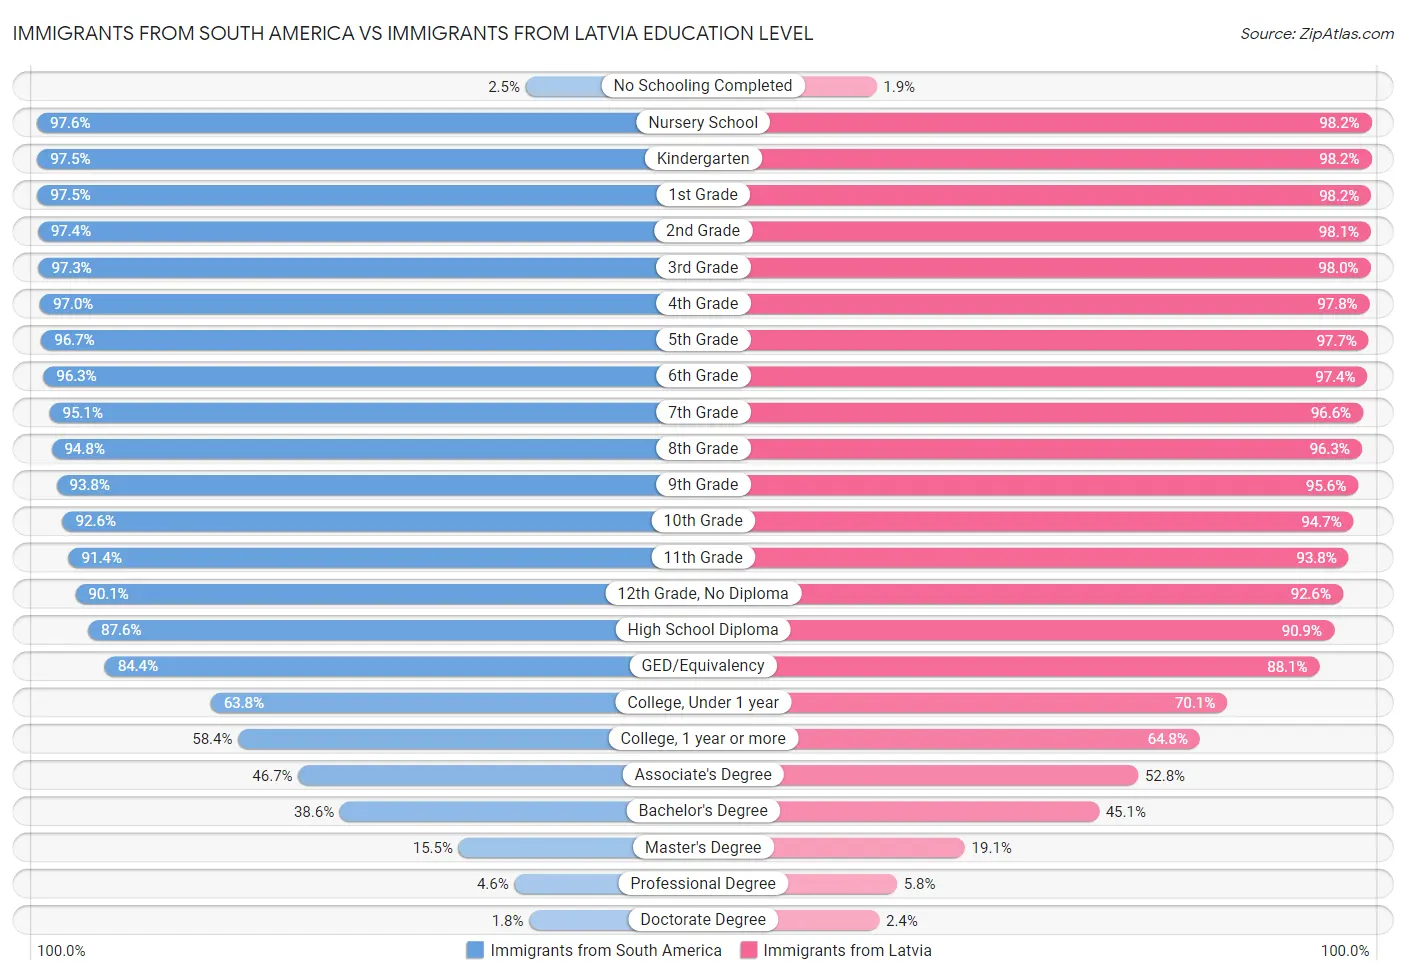 Immigrants from South America vs Immigrants from Latvia Education Level